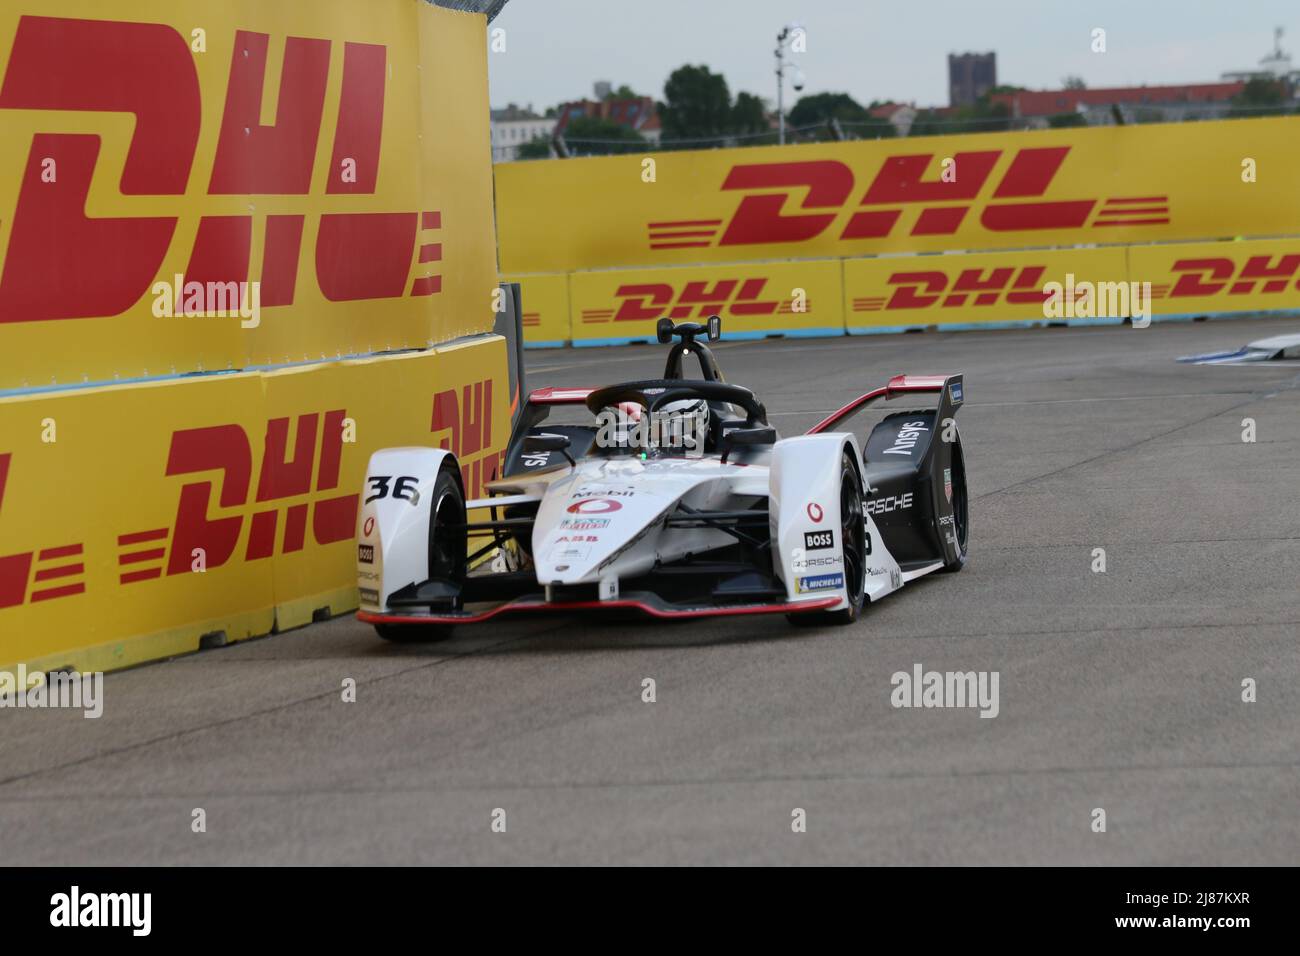 Germany, Berlin, May 13, 2022. Andre Lotterer from Team Porsche at the shakedown The official championship 'ABB FIA Formula E Championship 2021/22' consists of 16 races, which are held in 10 different cities worldwide. The Shell Recharge Berlin E-Prix 2022 is on May 14th and 15th, 2022 with a double race in Berlin. The 2021/2022 electric racing series will take place at the former Tempelhof Airport.. Stock Photo